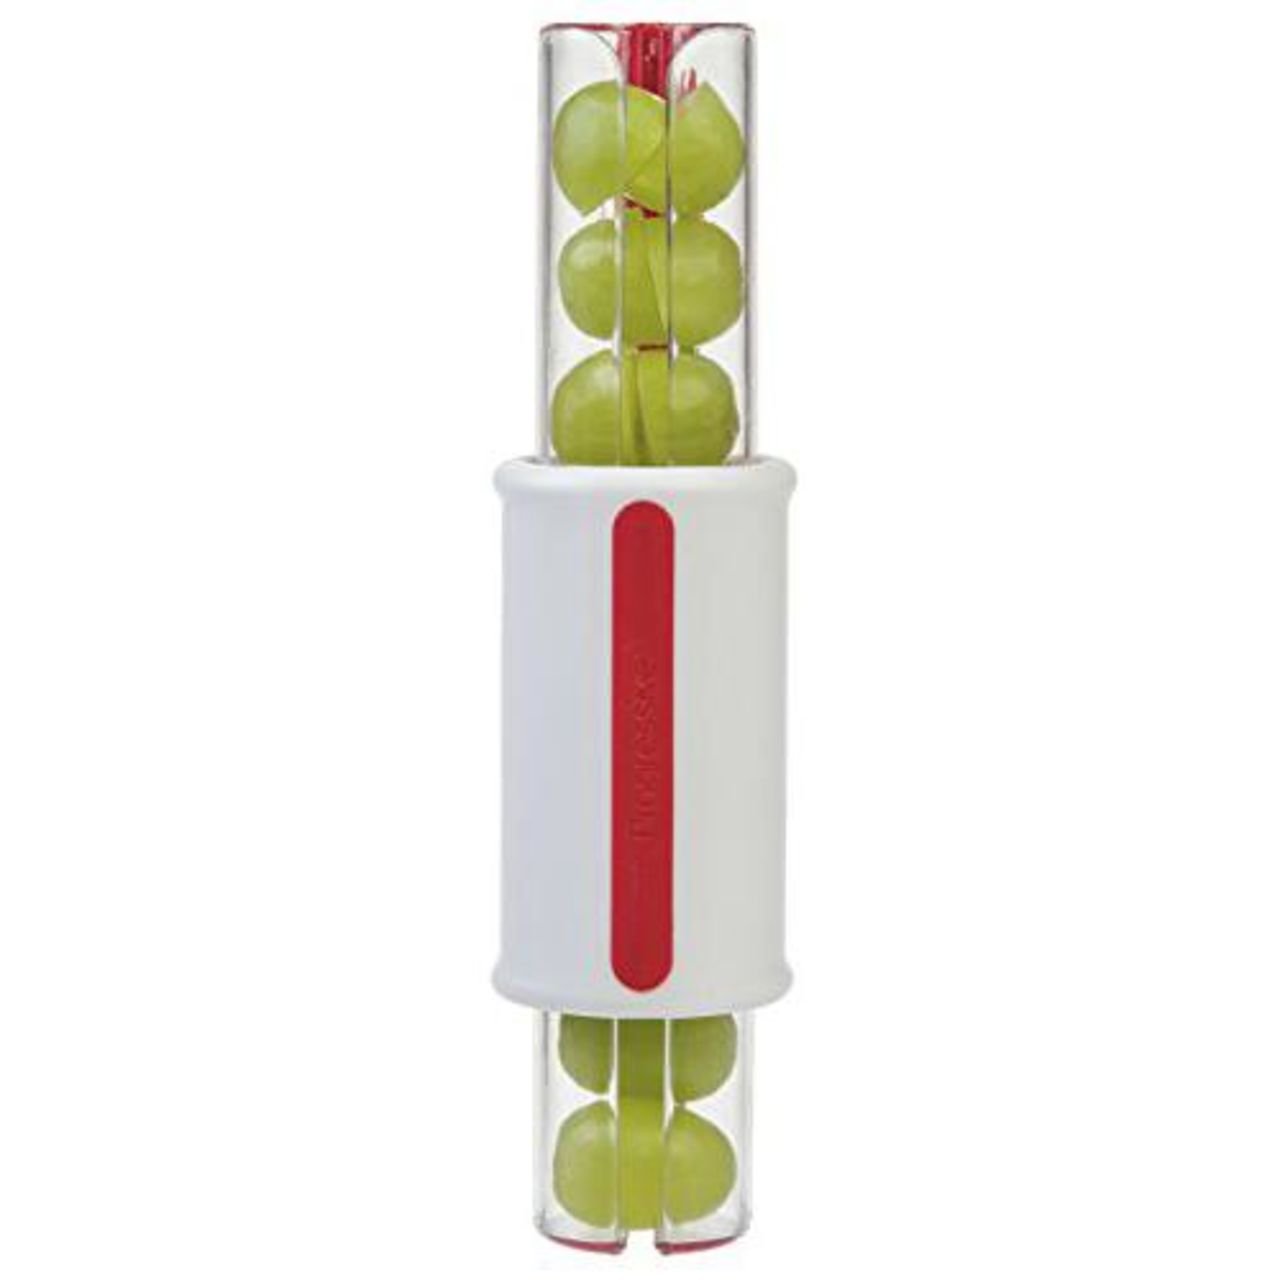 Portable Cherry Tomatoes Grape Slicer Cutting Kitchen Gadgets